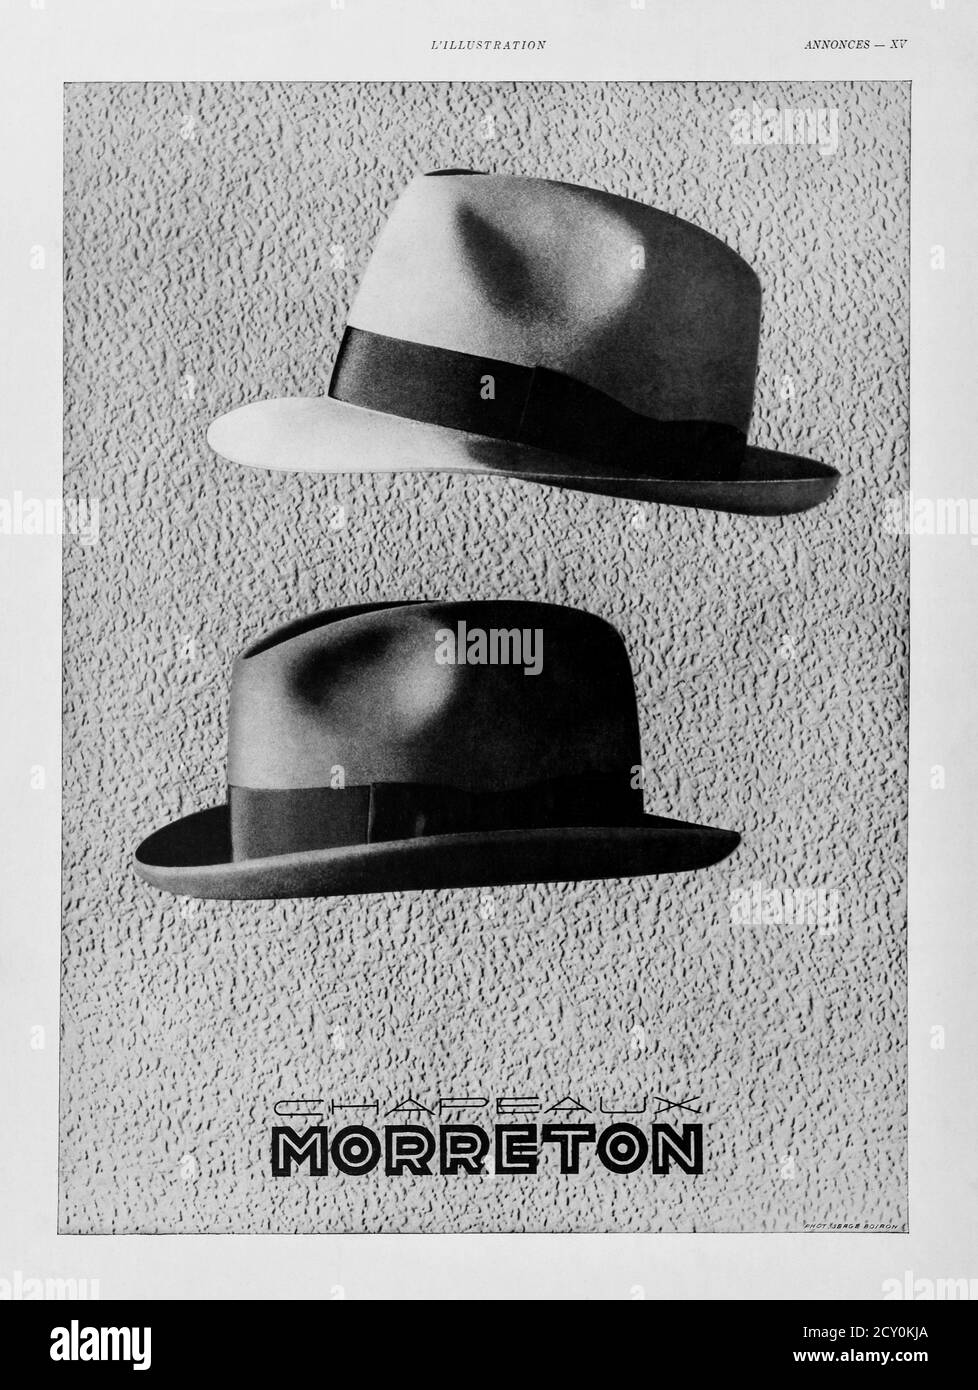 1930 advert for 'Morreton' gentlemen's hats from the French 'l'Illustration' magazine. Stock Photo